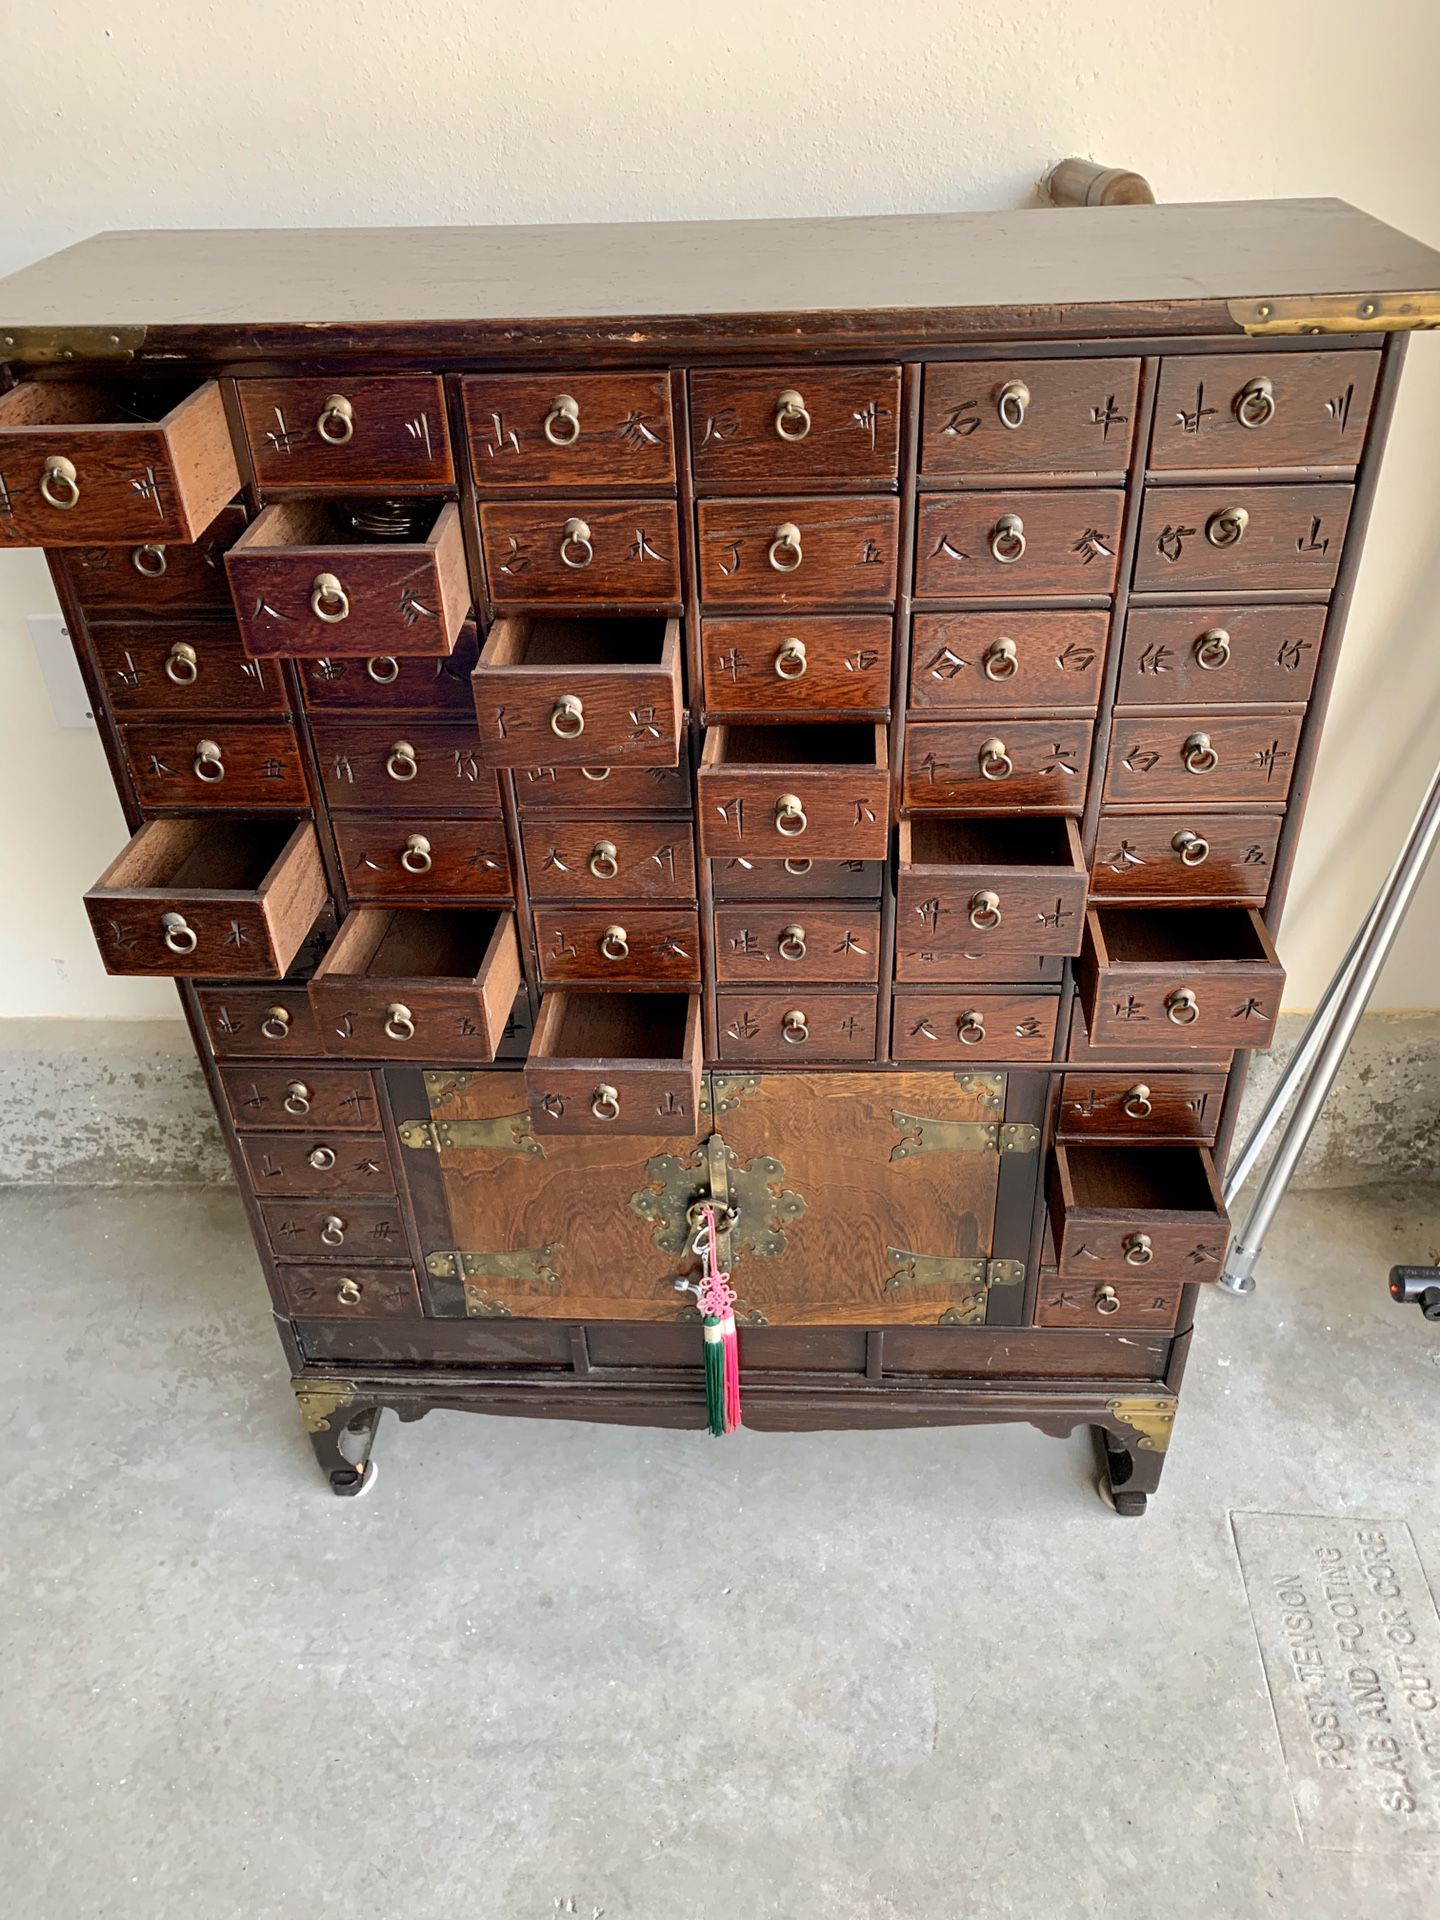 Antique Asian apothecary chest / medicine cabinet